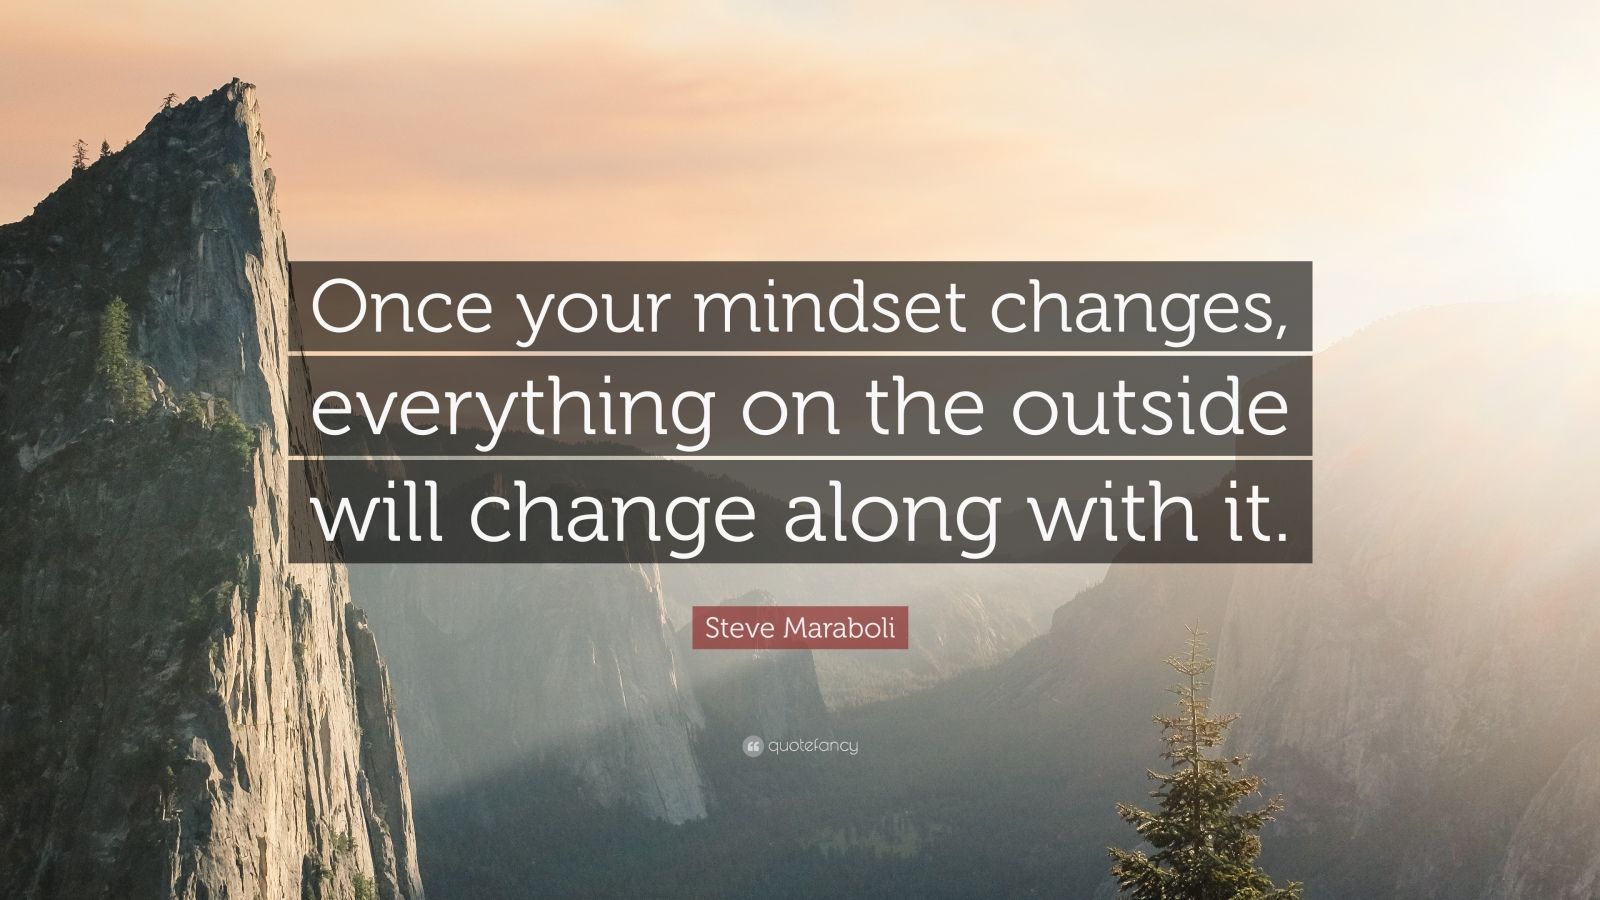 Steve Maraboli Quote: “Once your mindset changes, everything on the ...